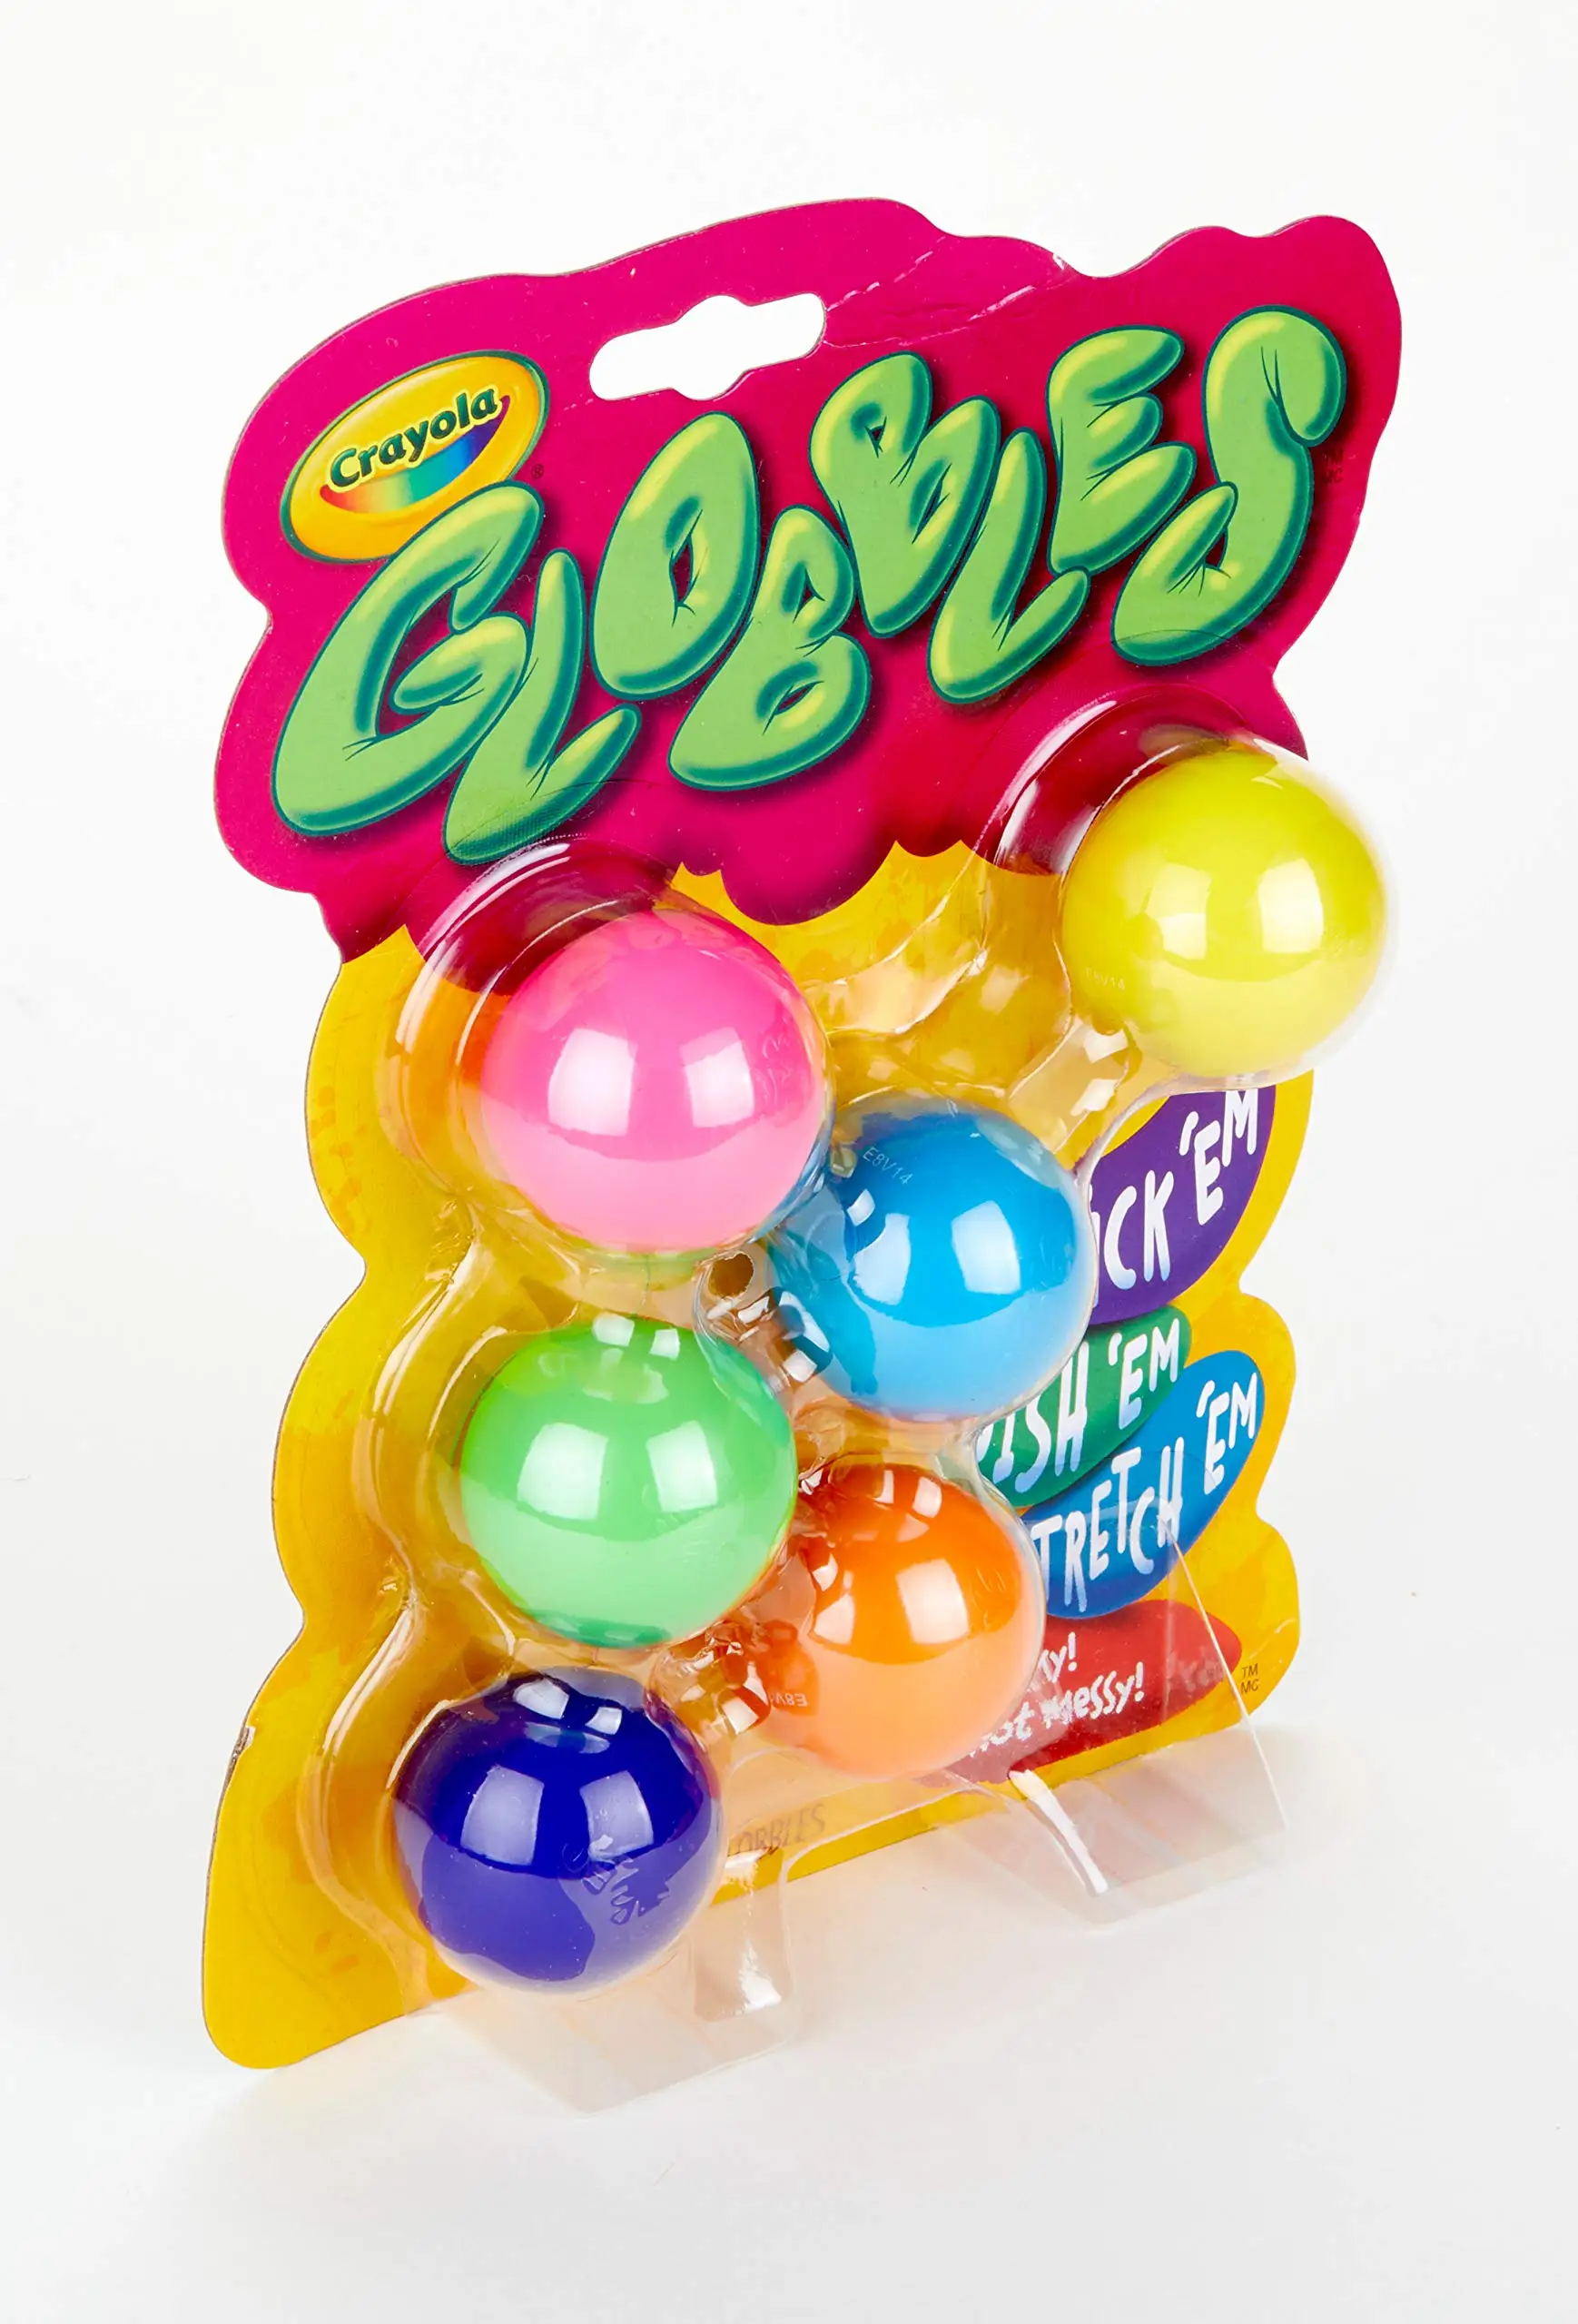 Details about   4x Sticky Wall Balls for Ceiling Stress Relief Globbles Squishy Kids Toys Xmas ! 